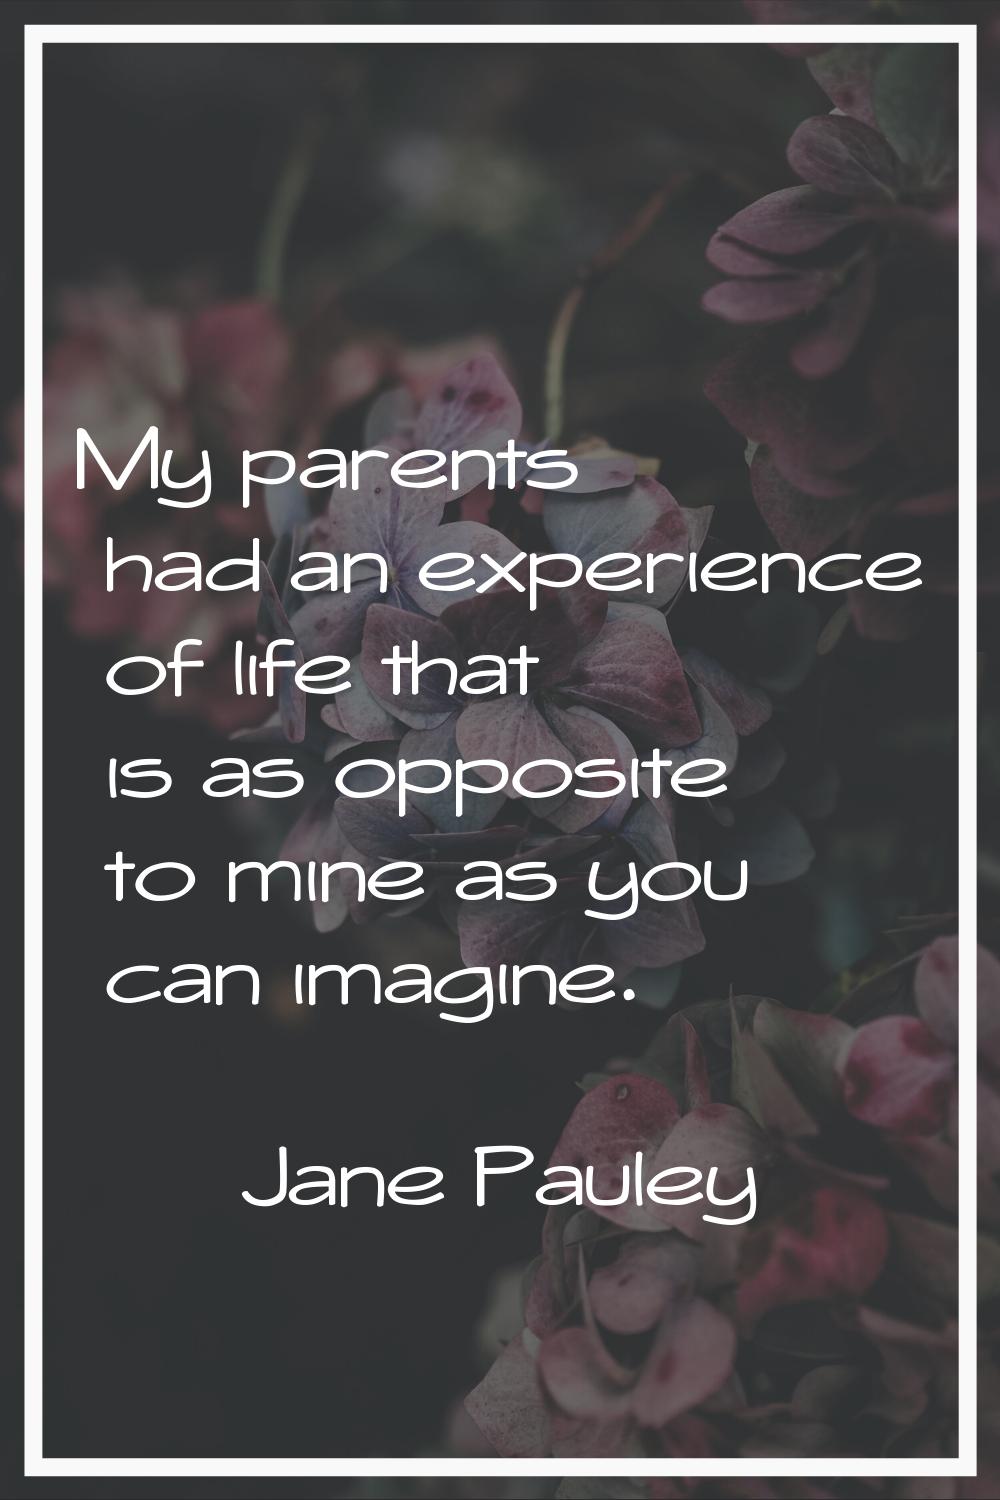 My parents had an experience of life that is as opposite to mine as you can imagine.